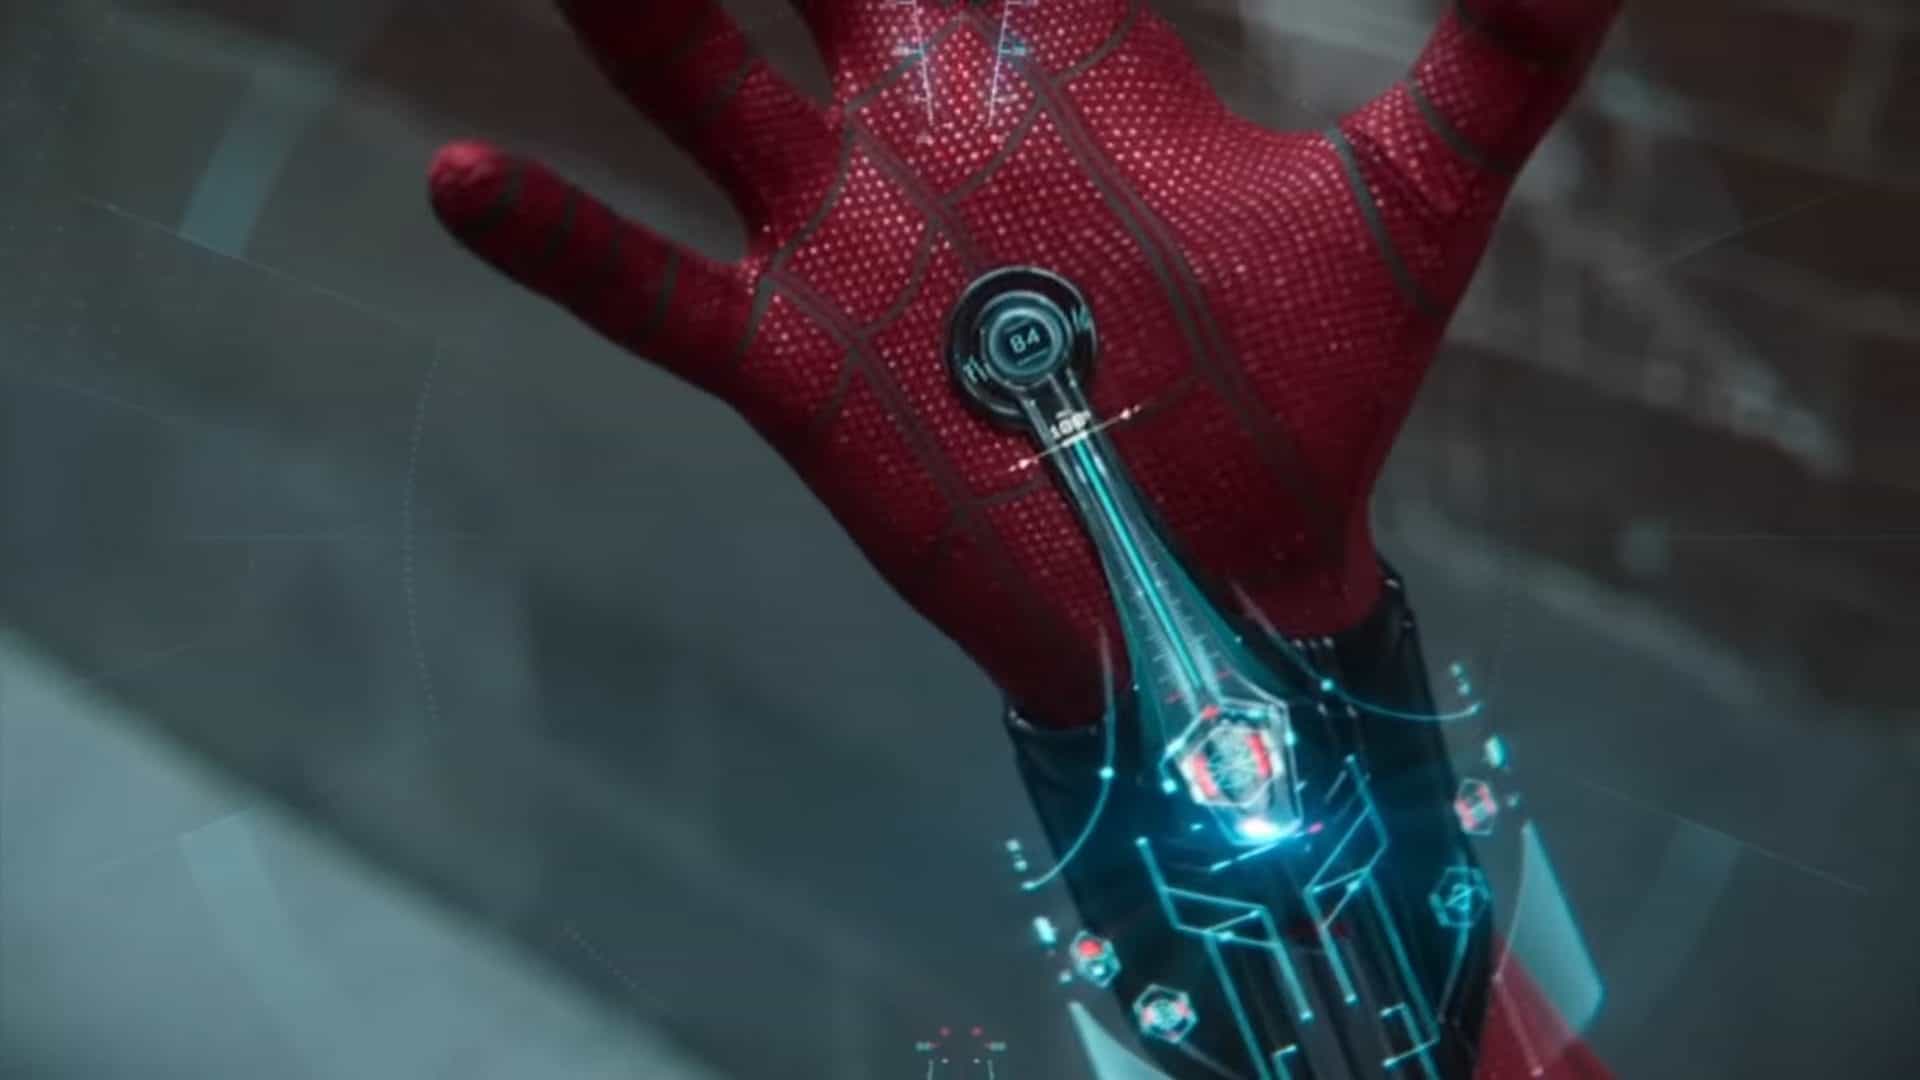 Tom's Spider-Man has high tech suit